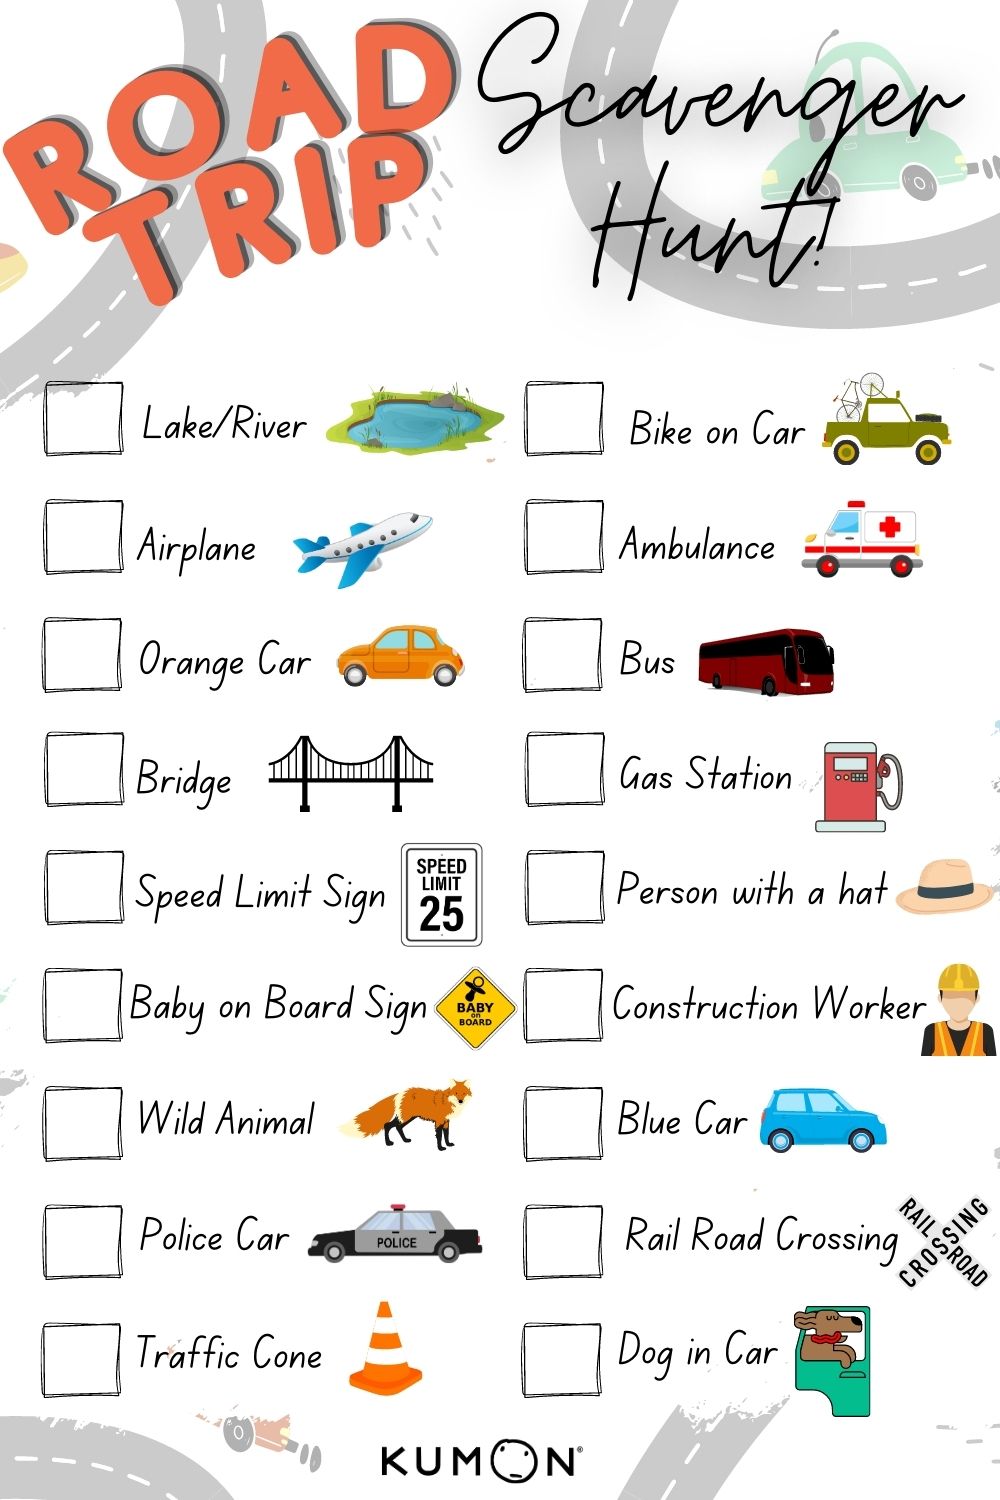 7 Fun Road Trip Games to Play (Free Download) - Student Resources